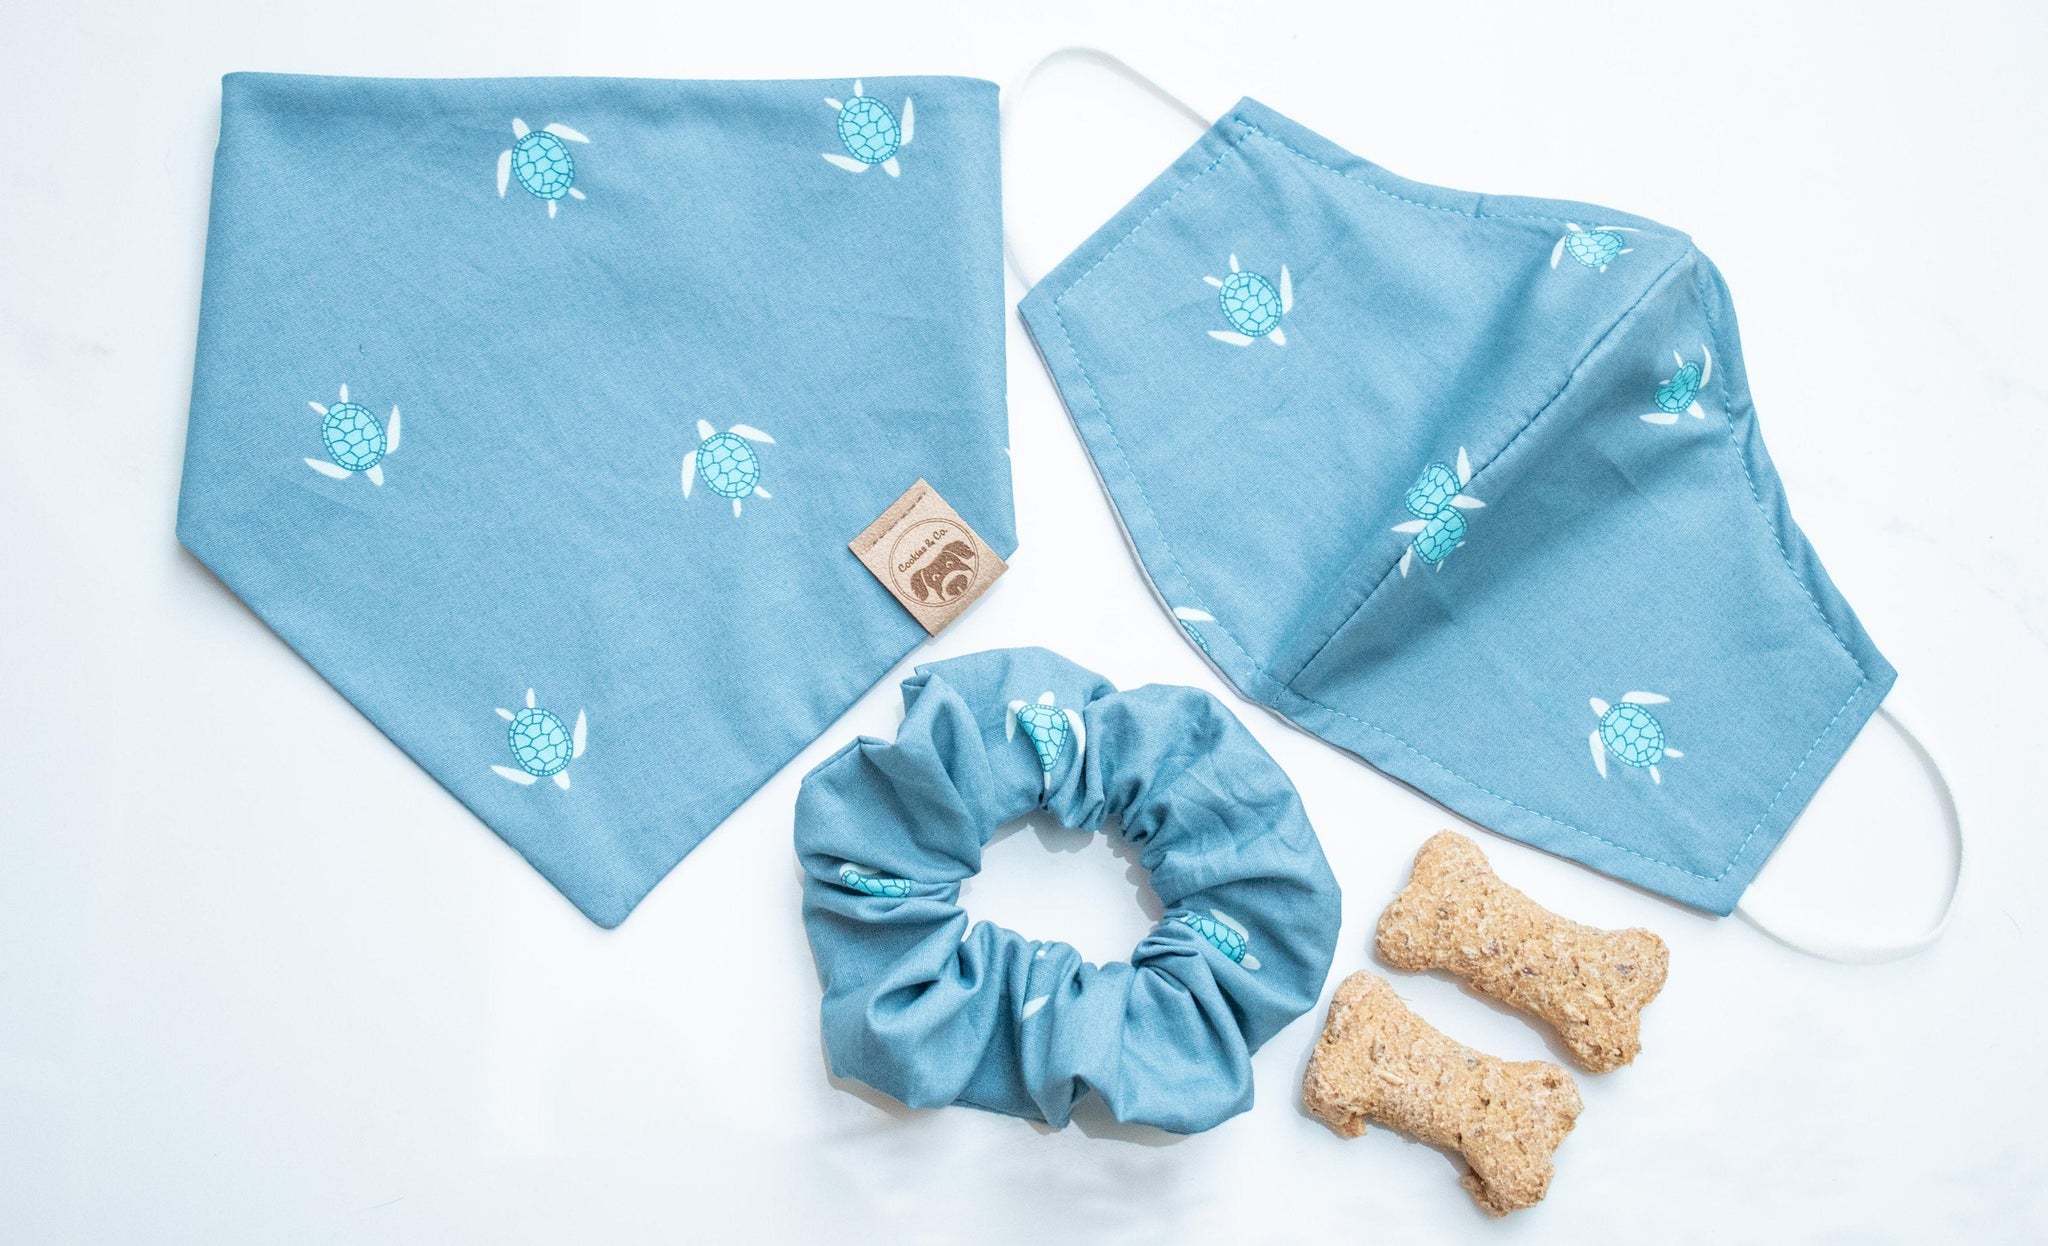 urtle reef bandana print, featuring rows of small, light blue shelled turtles swimming in opposite directions, socially distanced with each other, on a dar blue fabric. Group set, with matching scrunchie and mask